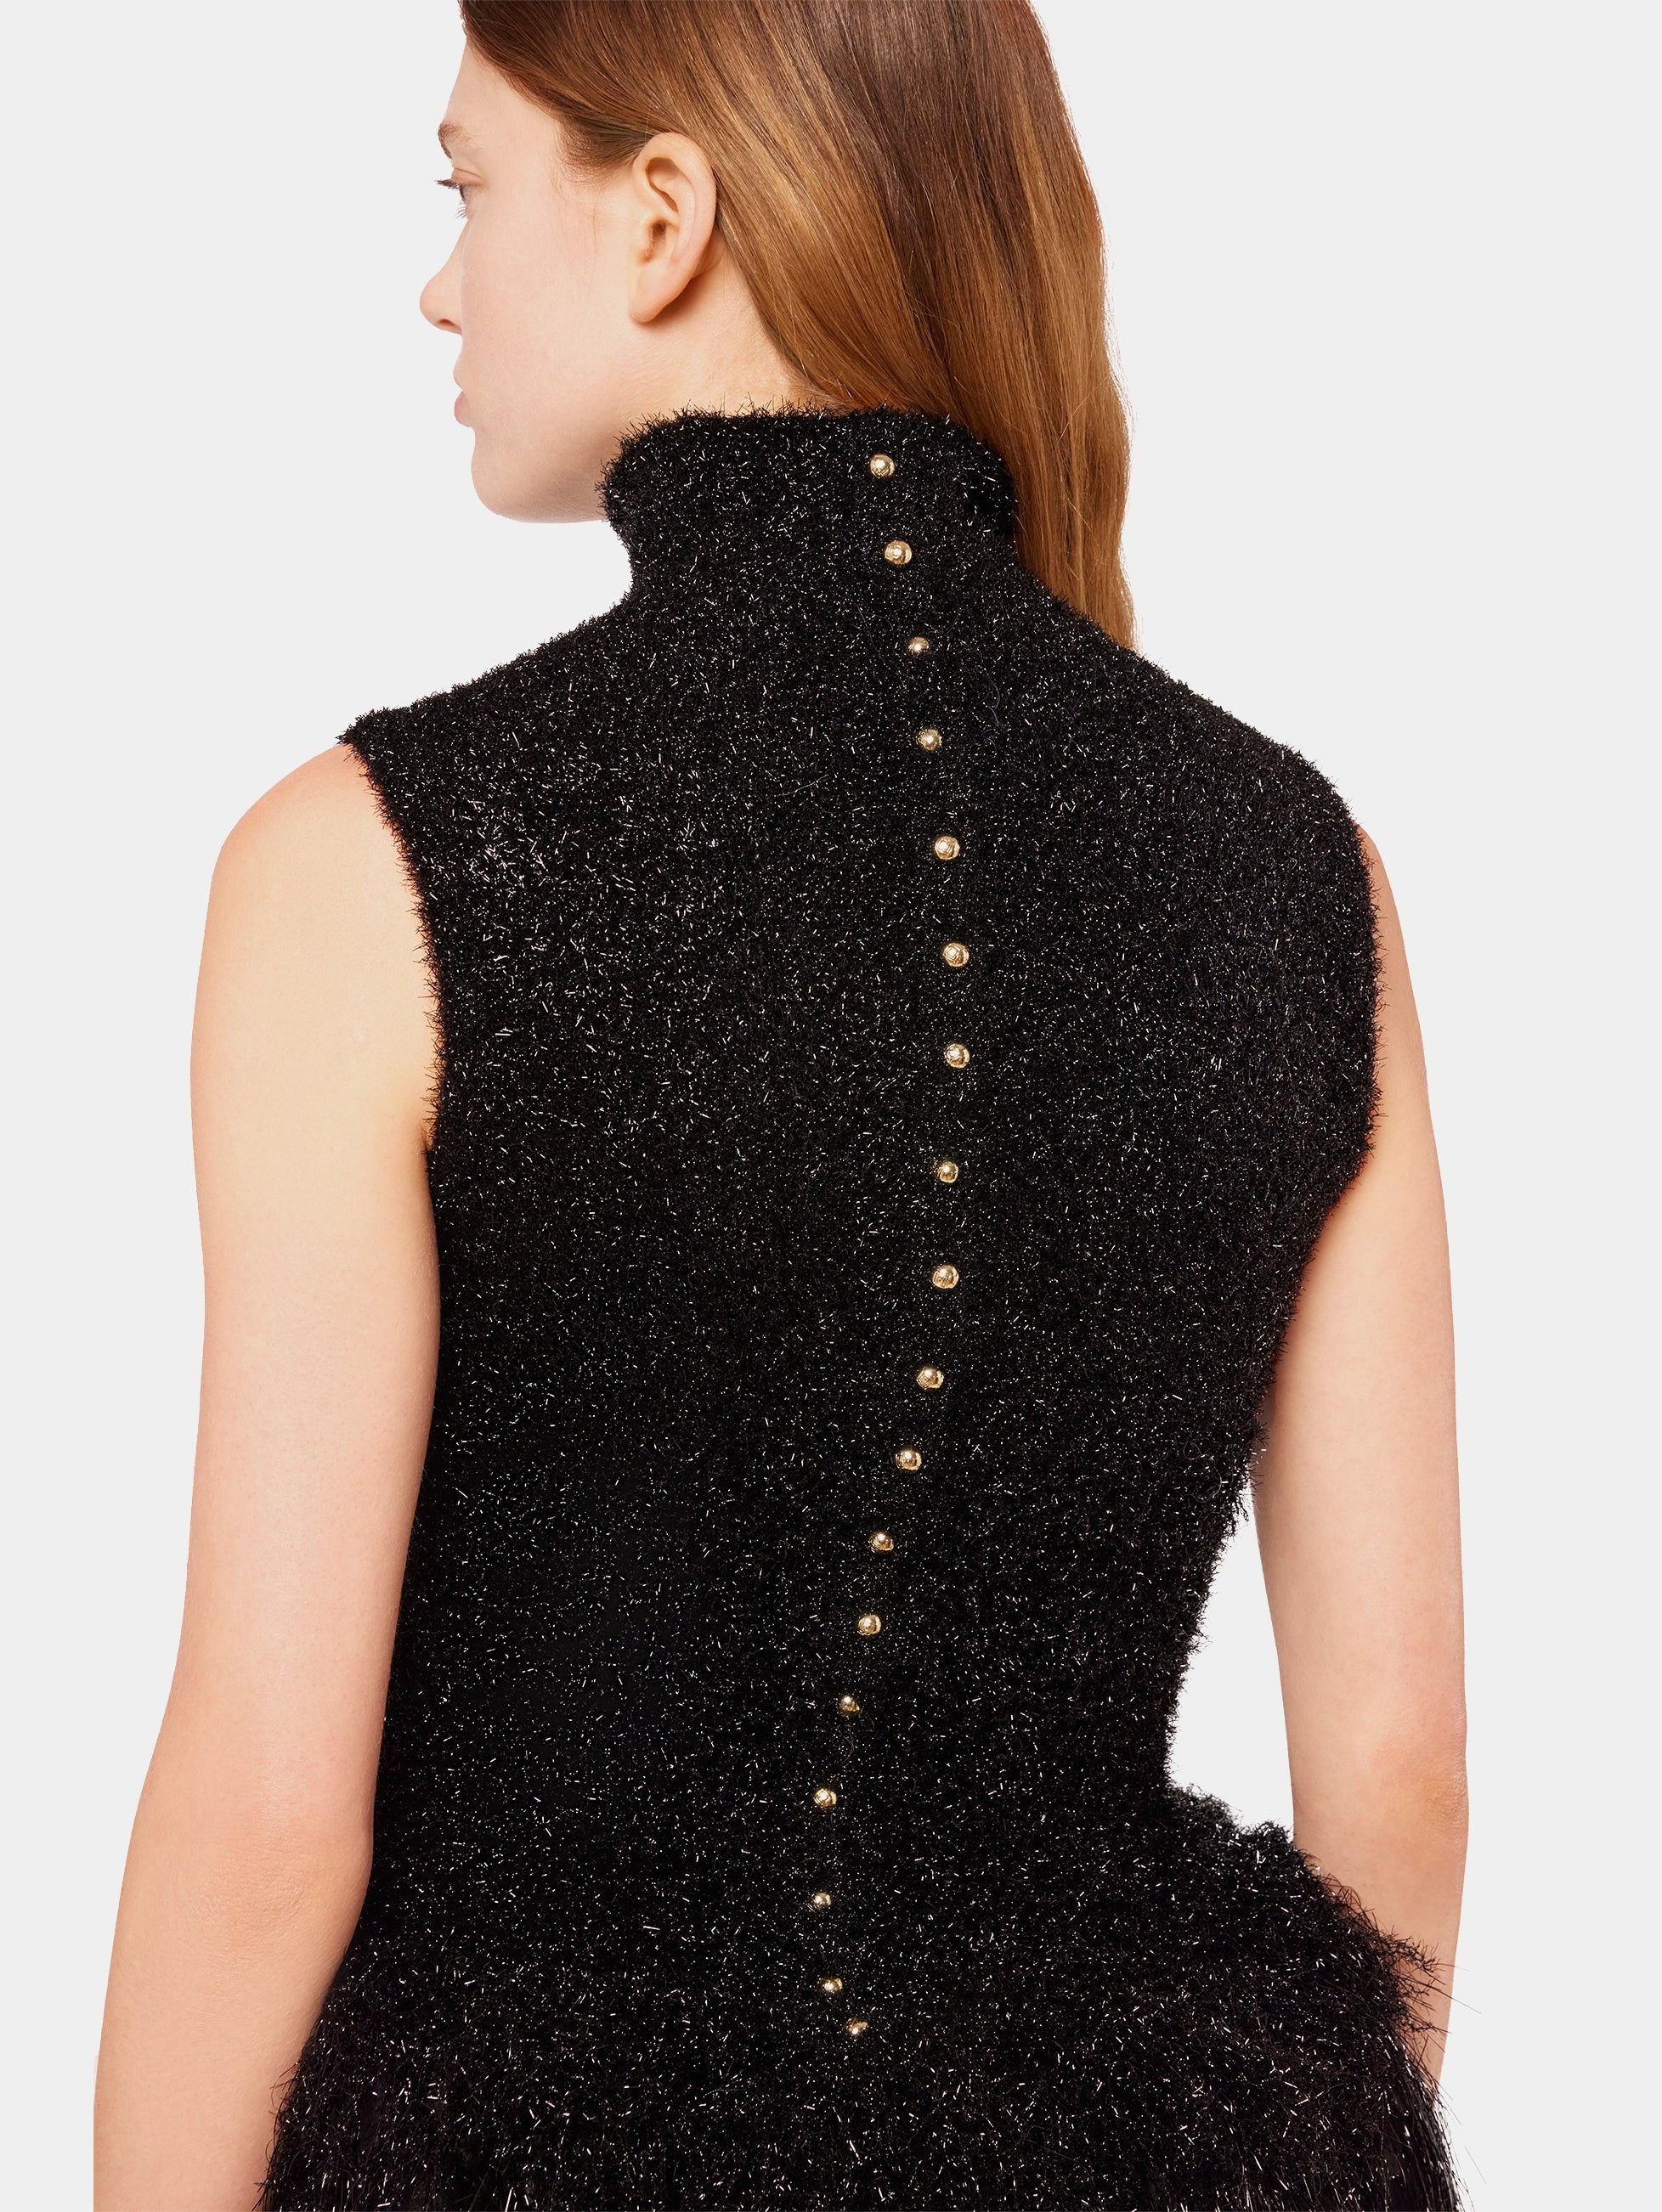 CROPPED BLACK CARDIGAN WITH GOLD BUTTONS - 5